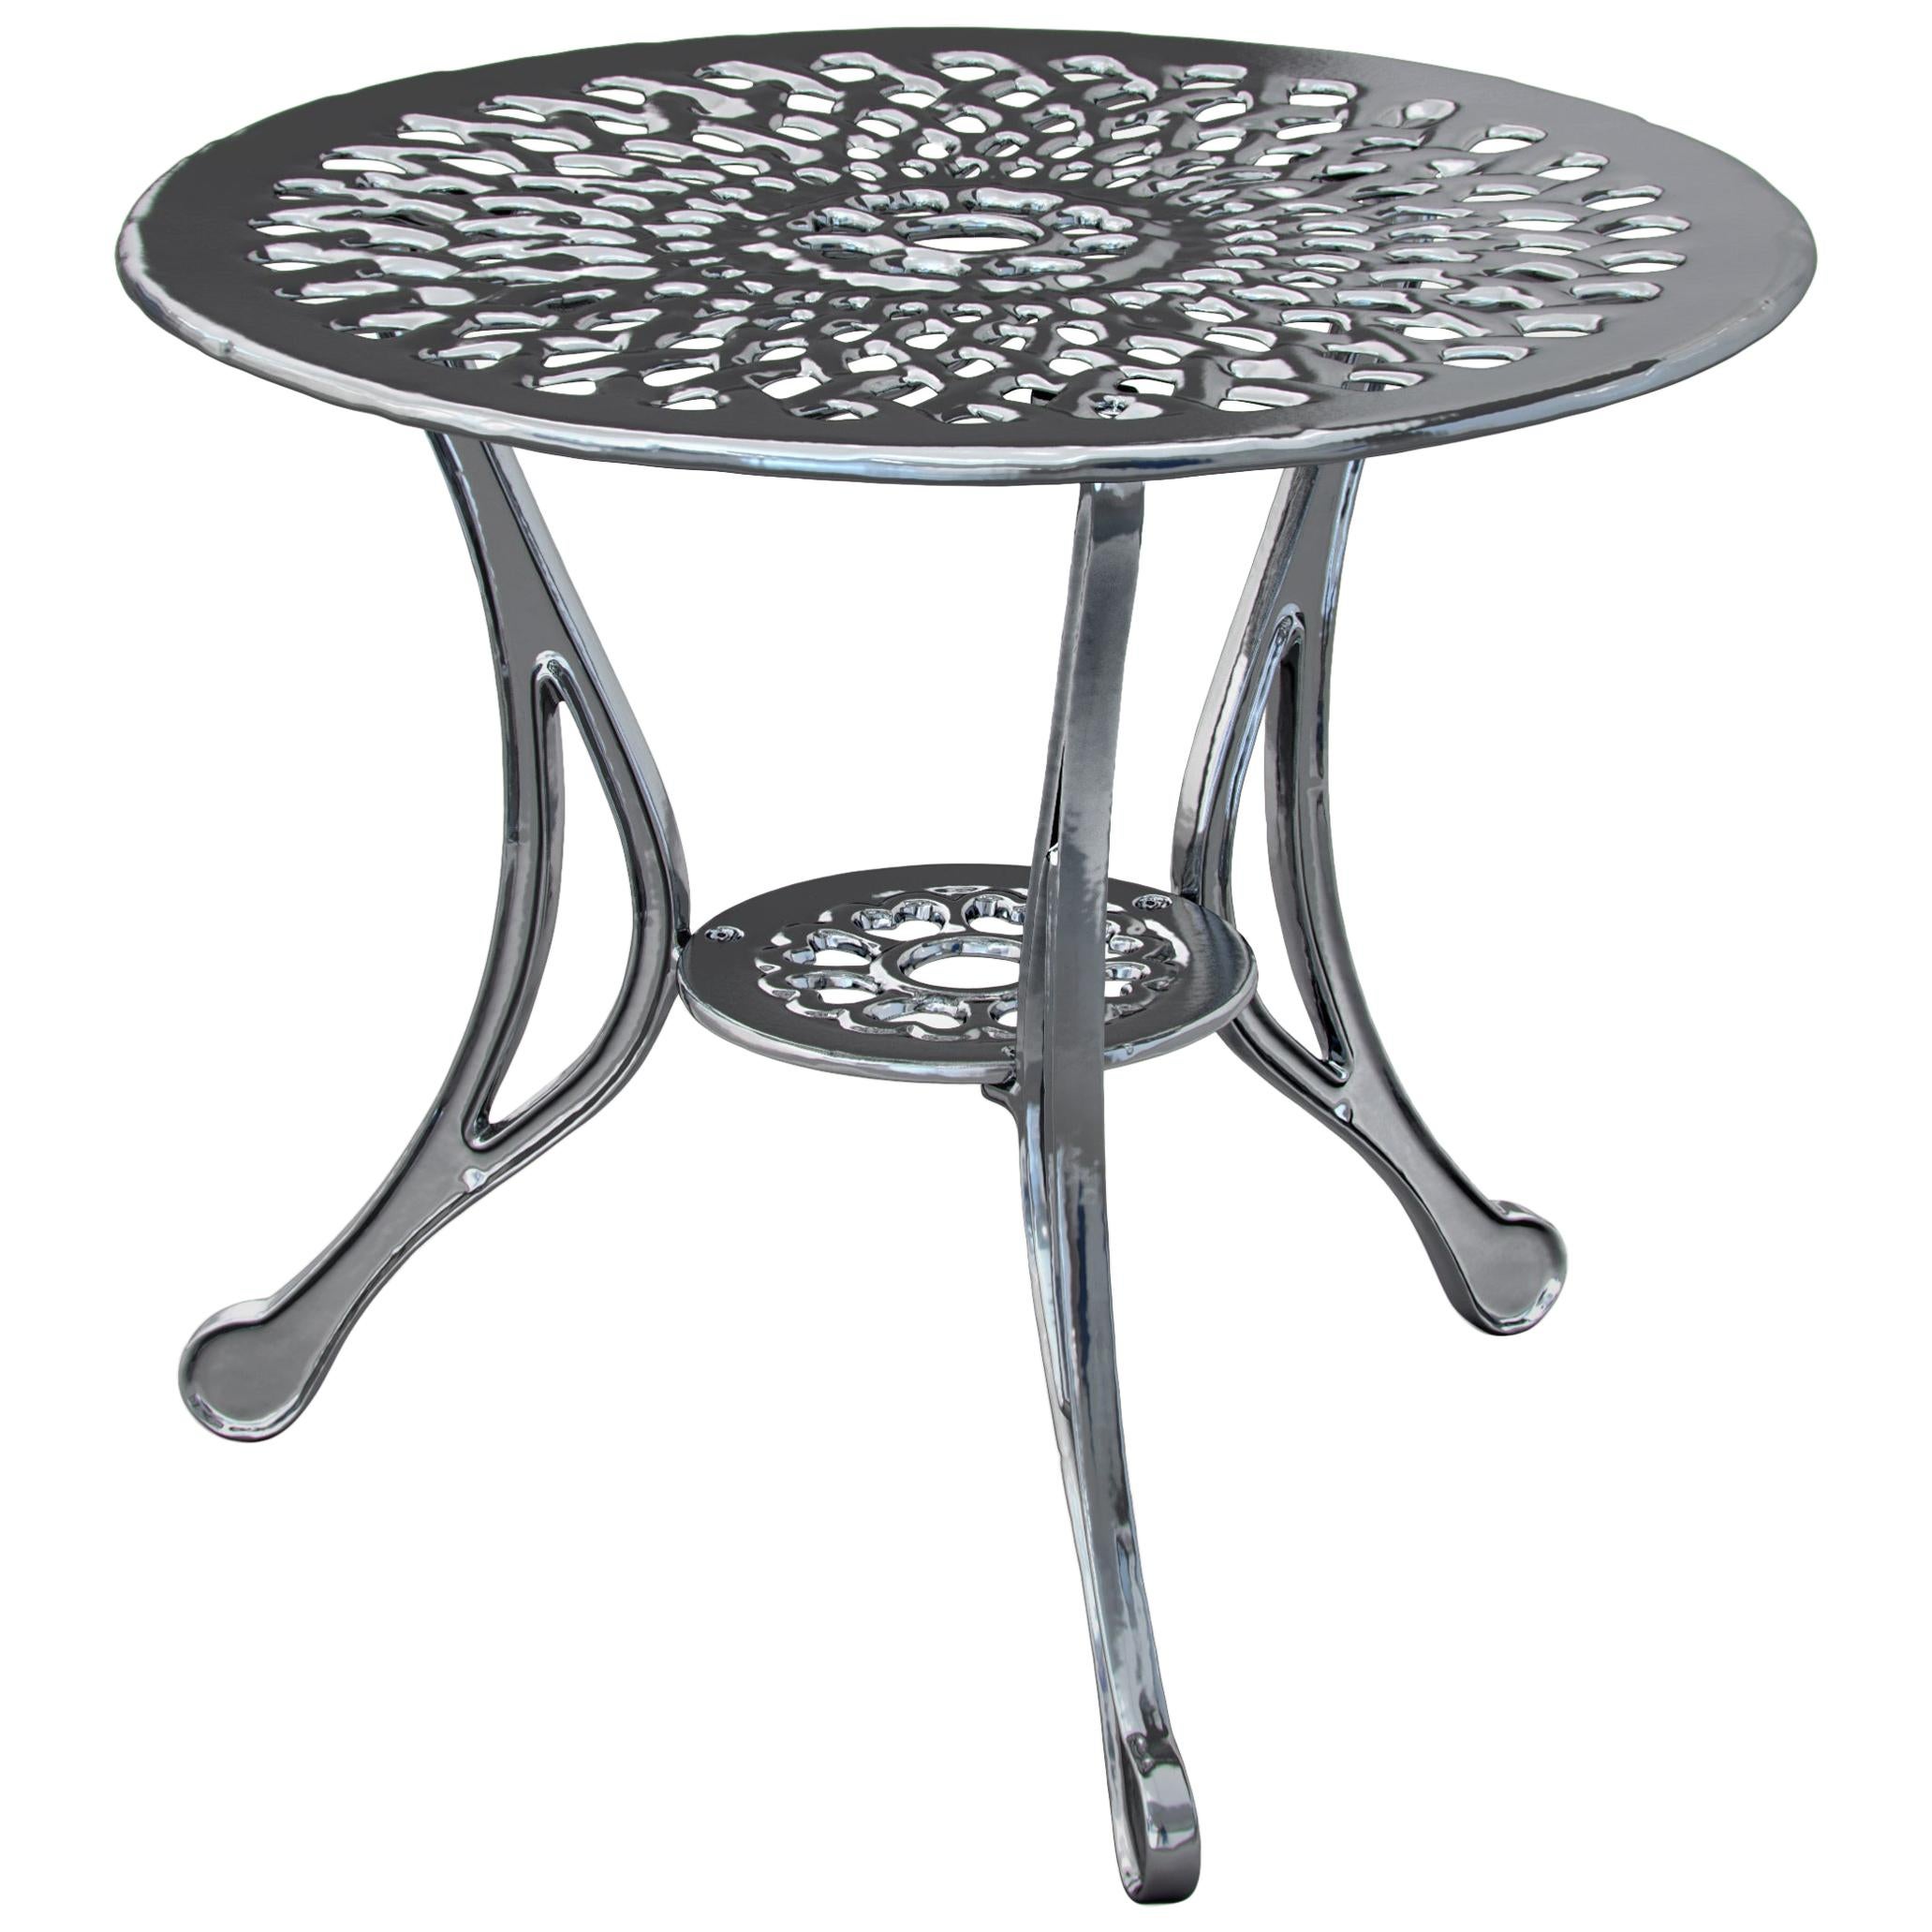 Varado, Outdoor Aluminum Side Table with Chrome Finish, Made in Italy